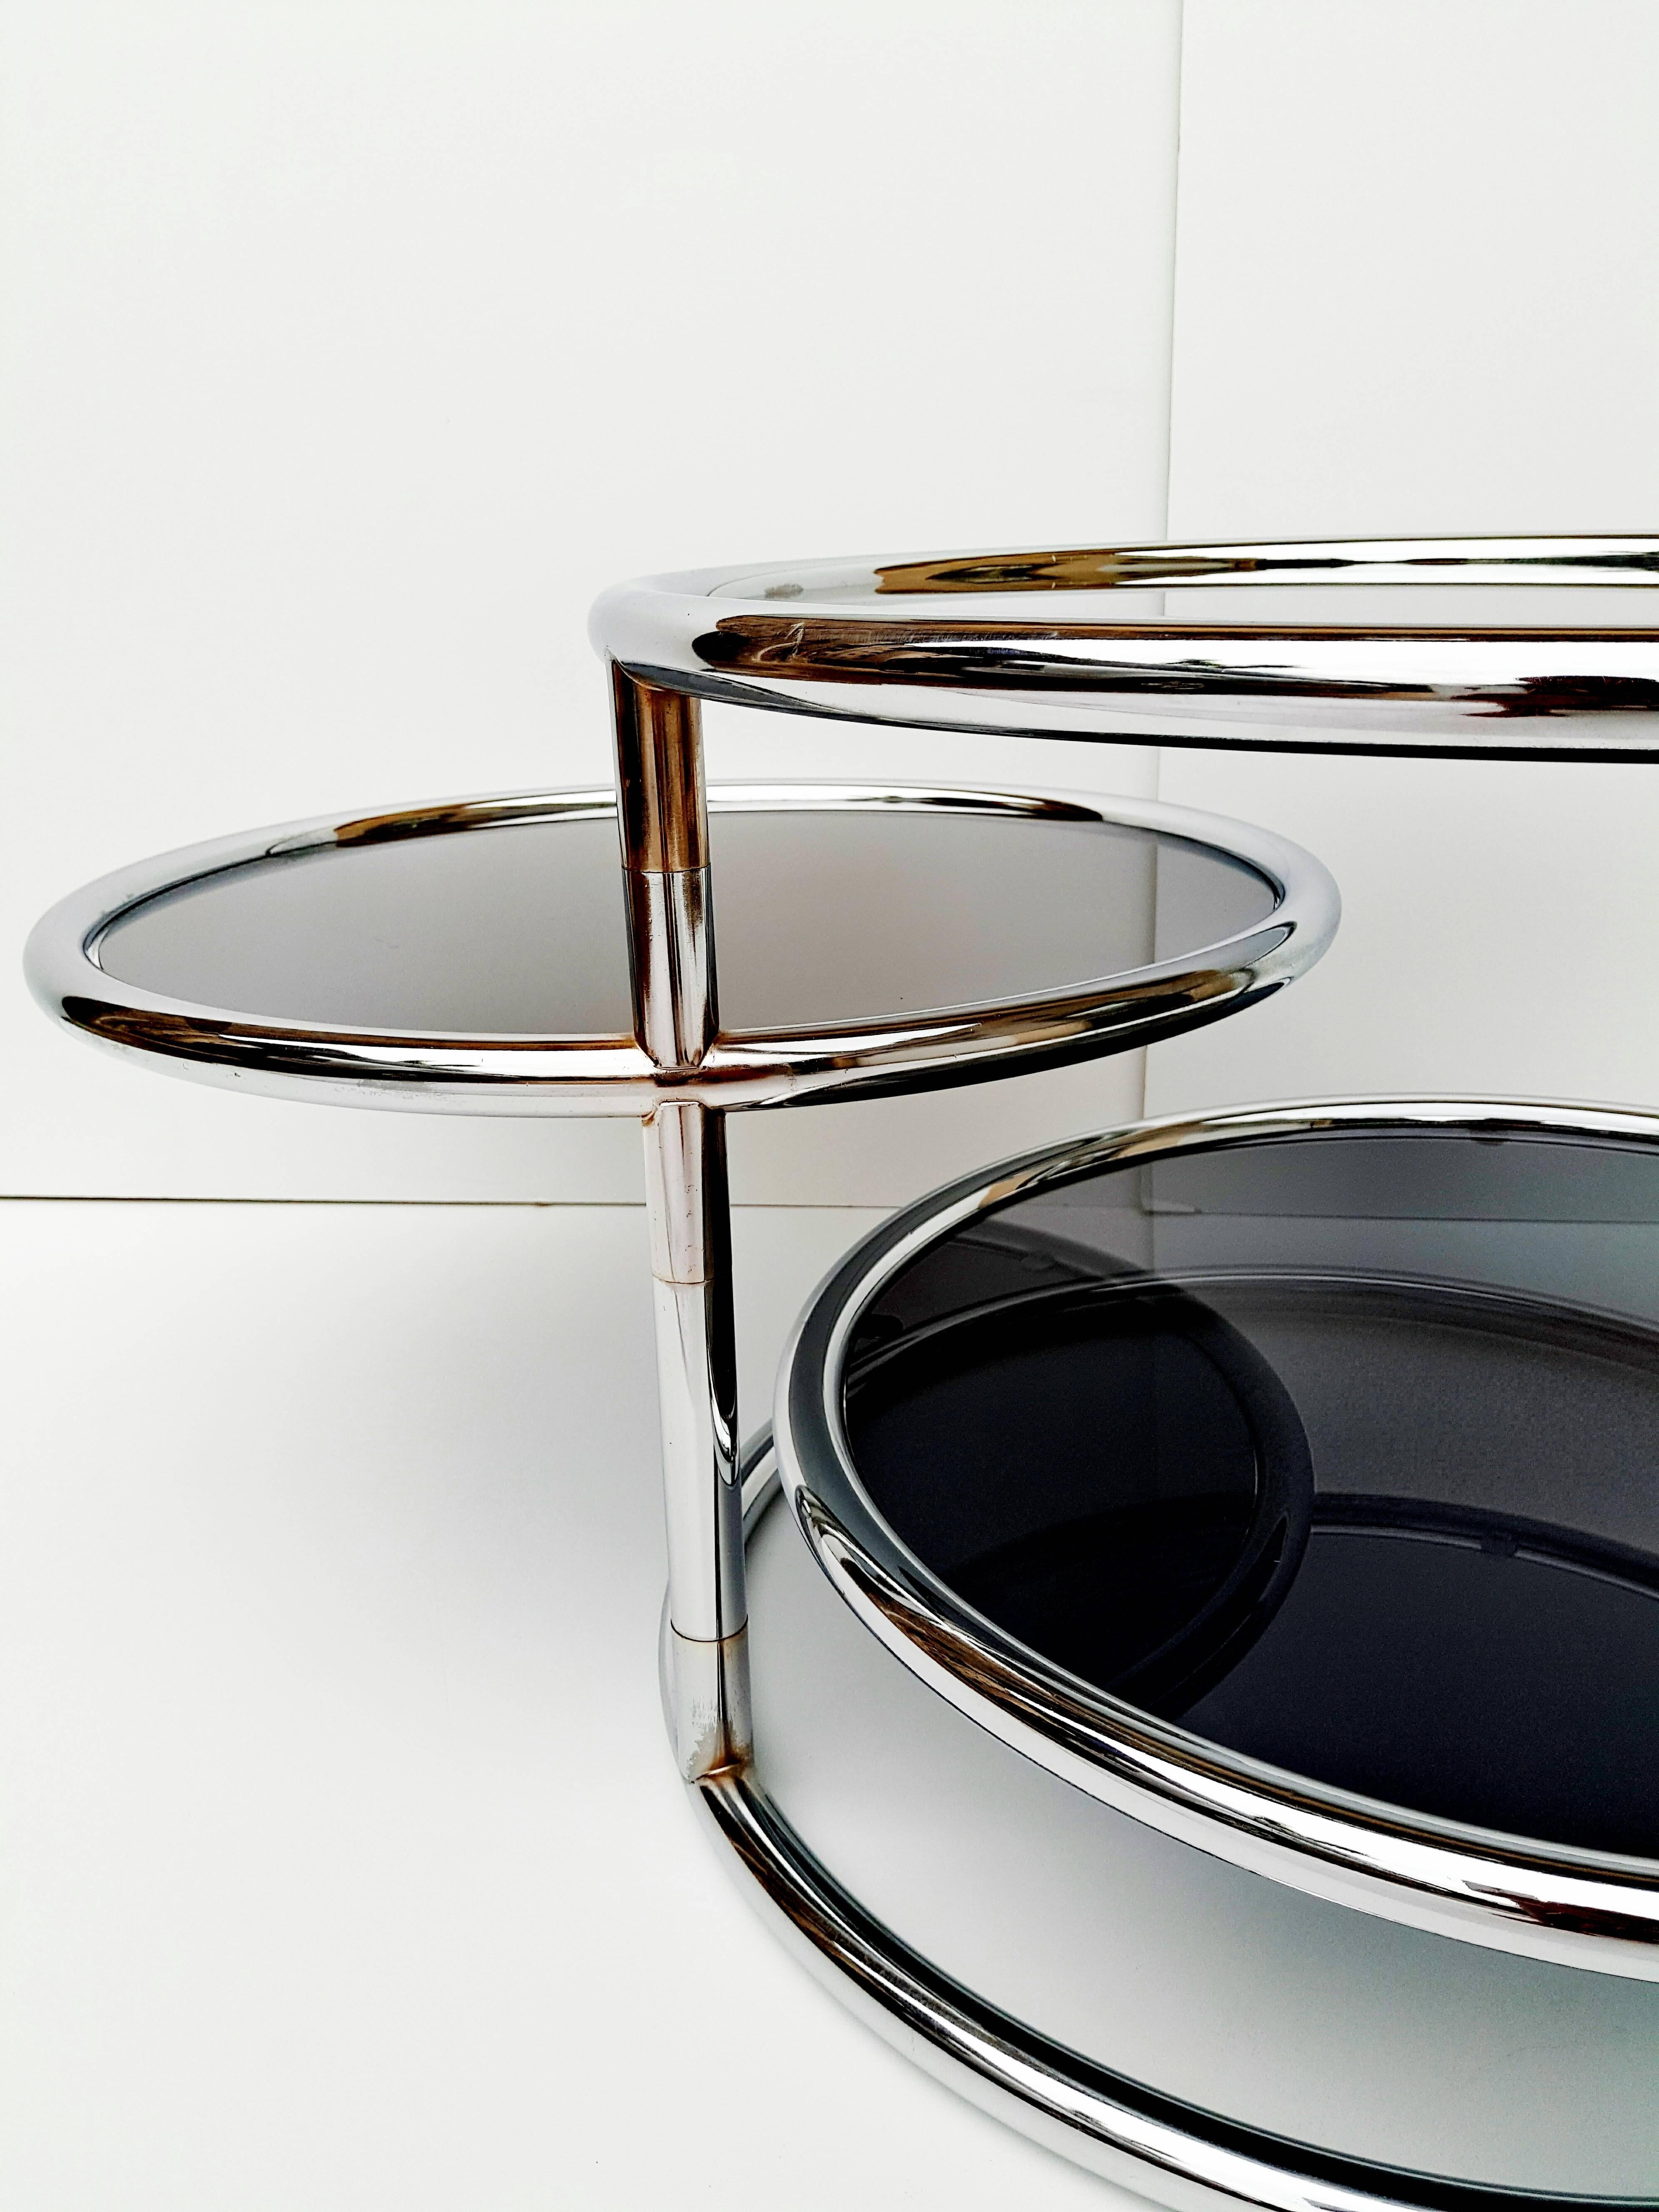 Attractive Mid-Century chrome and glass three-tier mechanical cocktail table attributed to Milo Baughman.
This coffee table features three tubular chrome and dark glass surfaces. Two top both swivel independently allowing the table to expand in